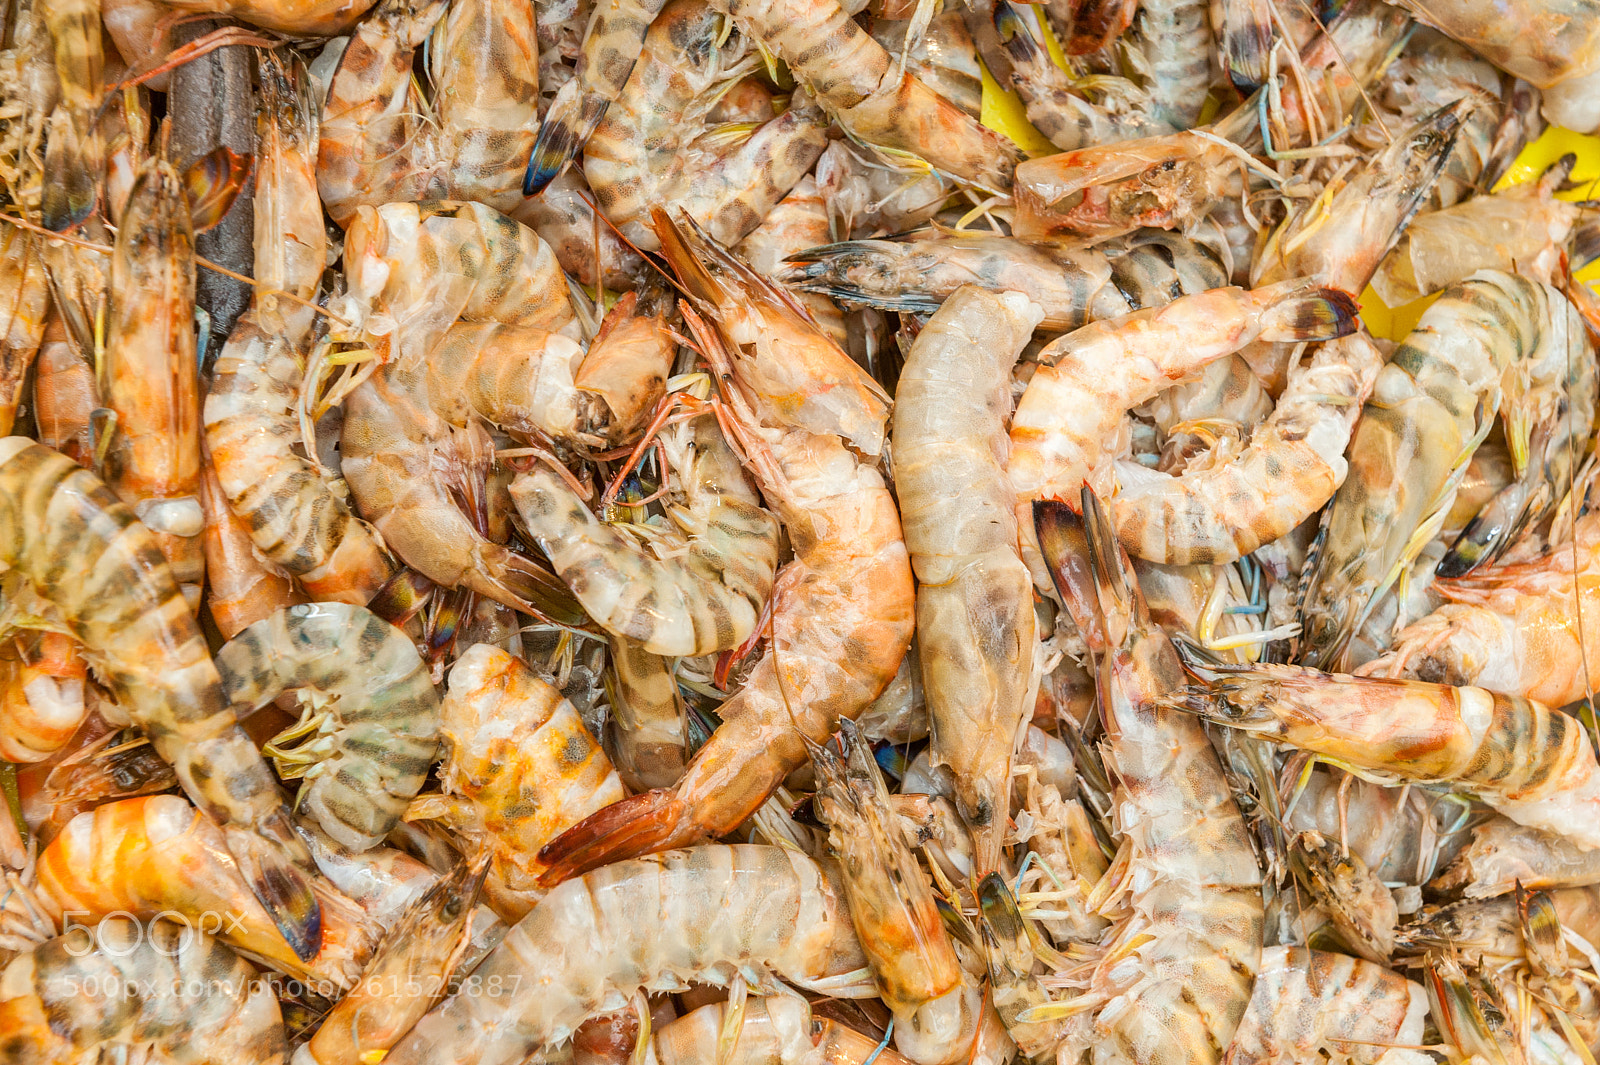 Nikon D700 sample photo. Seafood sold at the photography